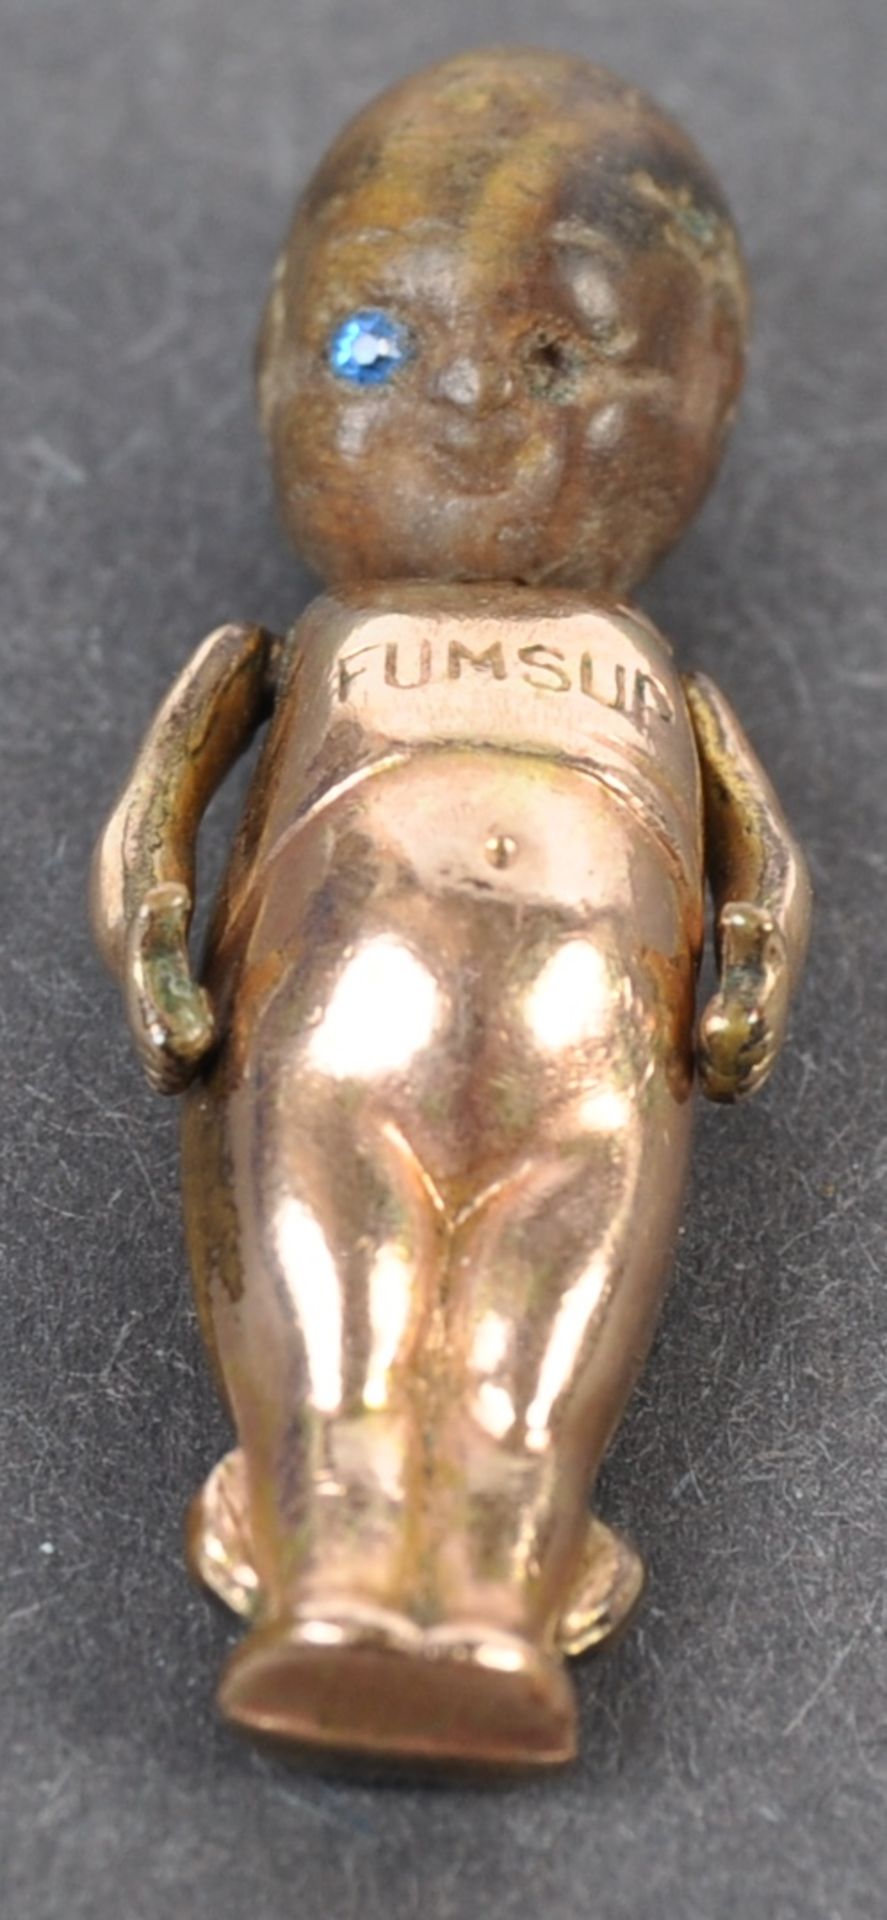 ORIGINAL WWI FIRST WORLD WAR SOLDIERS FUMSUP LUCKY CHARM - Image 2 of 4